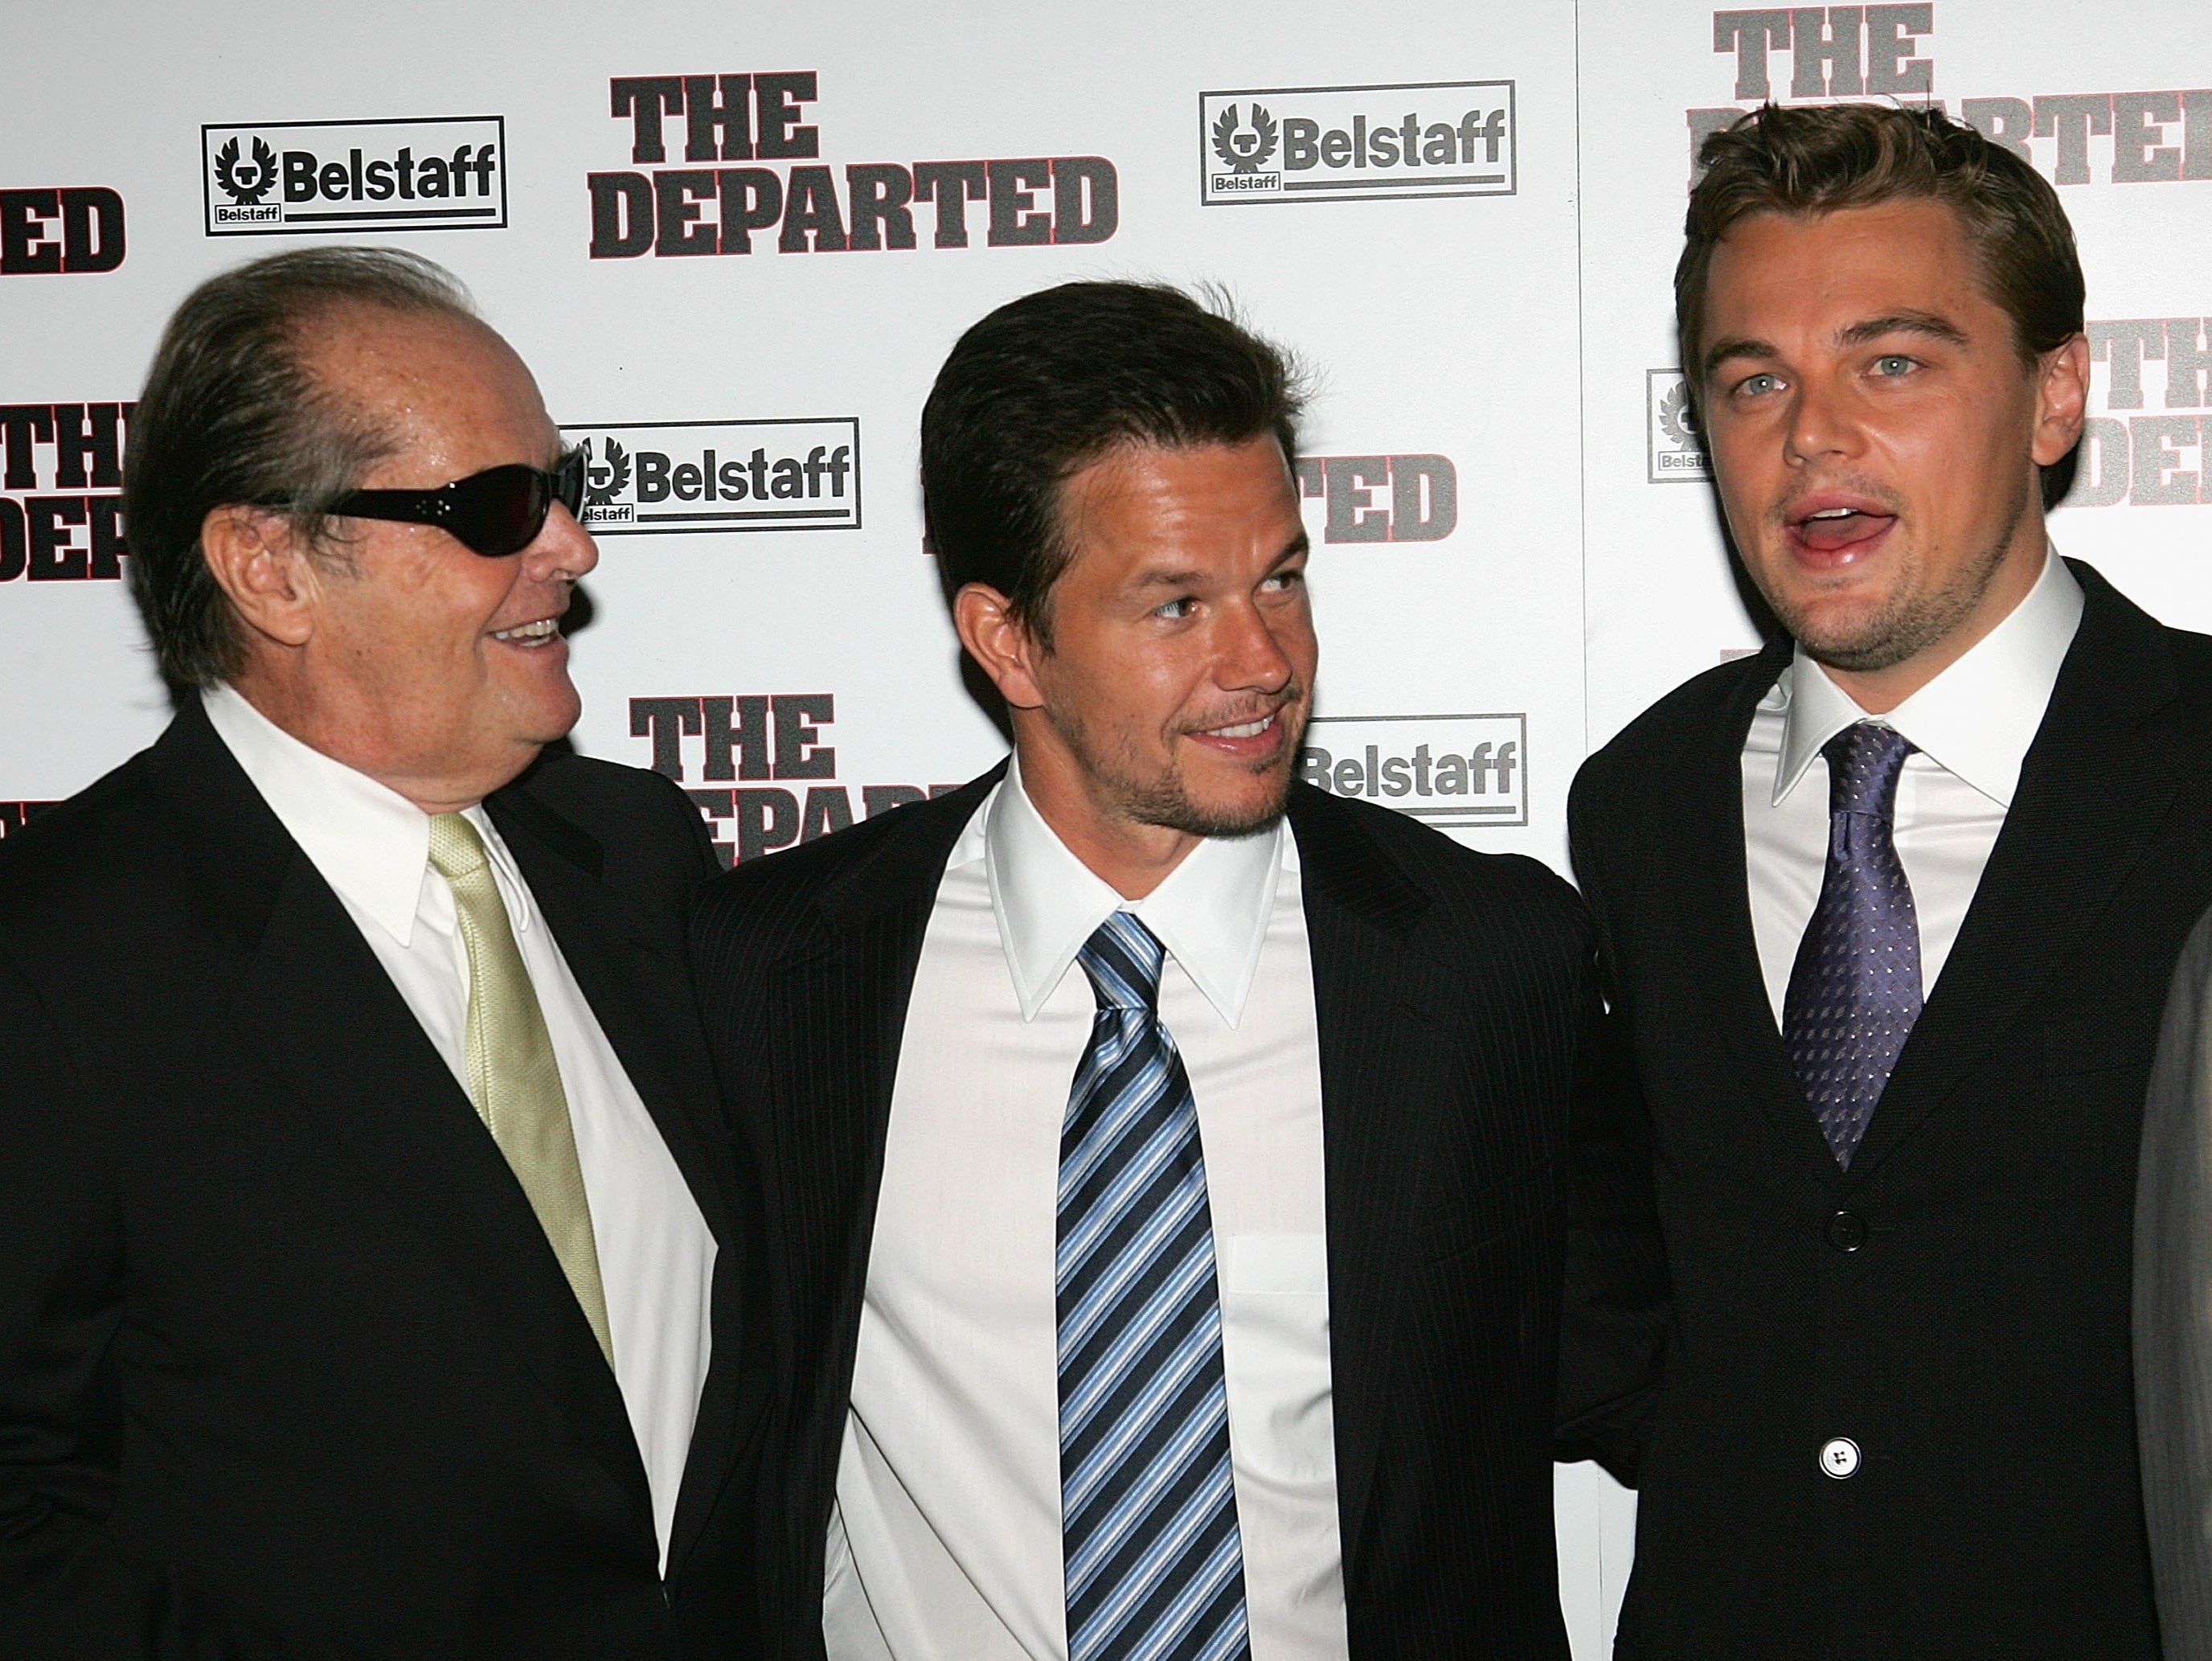 Jack Nicholson, Mark Wahlberg and Leonardo DiCaprio at the ‘Departed’ premiere in 2006